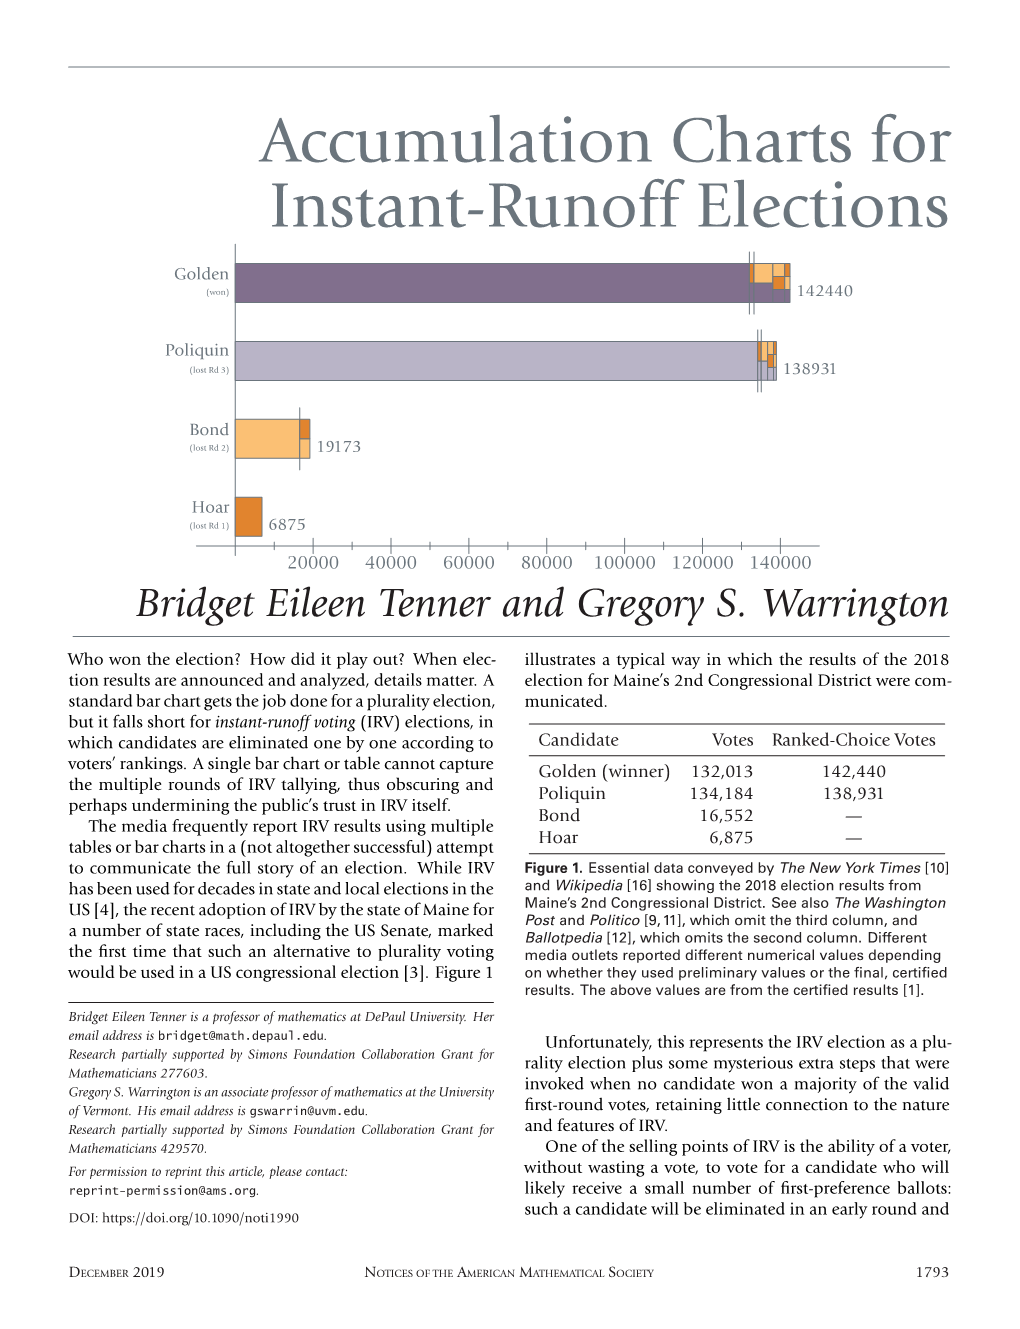 Accumulation Charts for Instant-Runoff Elections